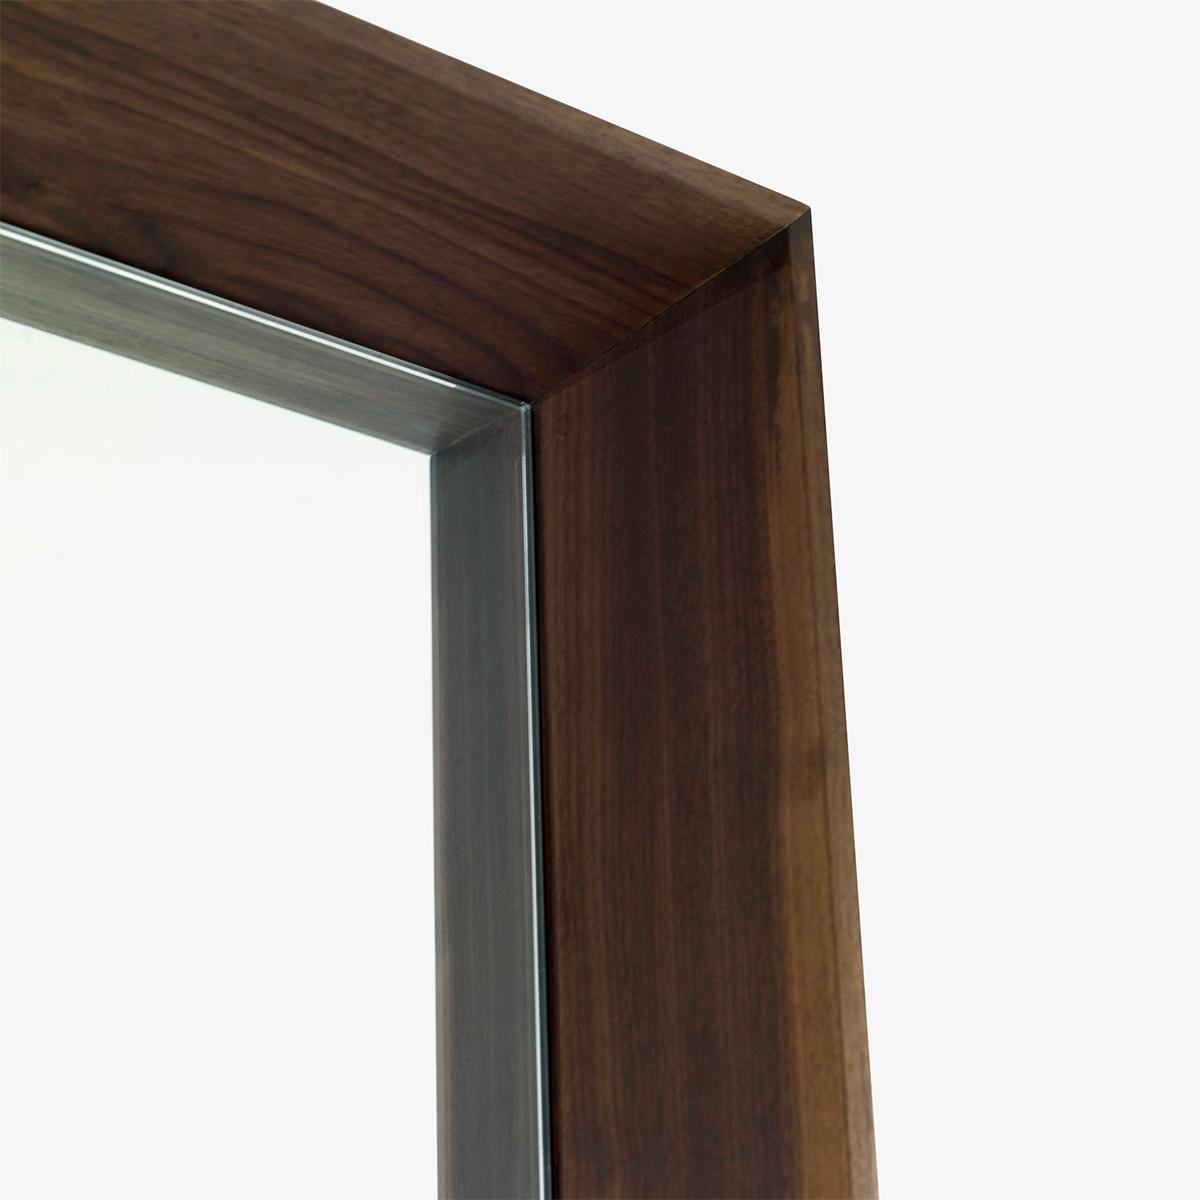 Mirror Reno walnut with solid
walnut wood frame, with flat
mirror glass. Walnut wood treated
with natural pine extracts.
Available in: 
L84 x D23 x H210,7cm, price: 3400,00€.
L114 x D23 x H210,7cm, price: 3900,00€.
Also available with solid oak wood